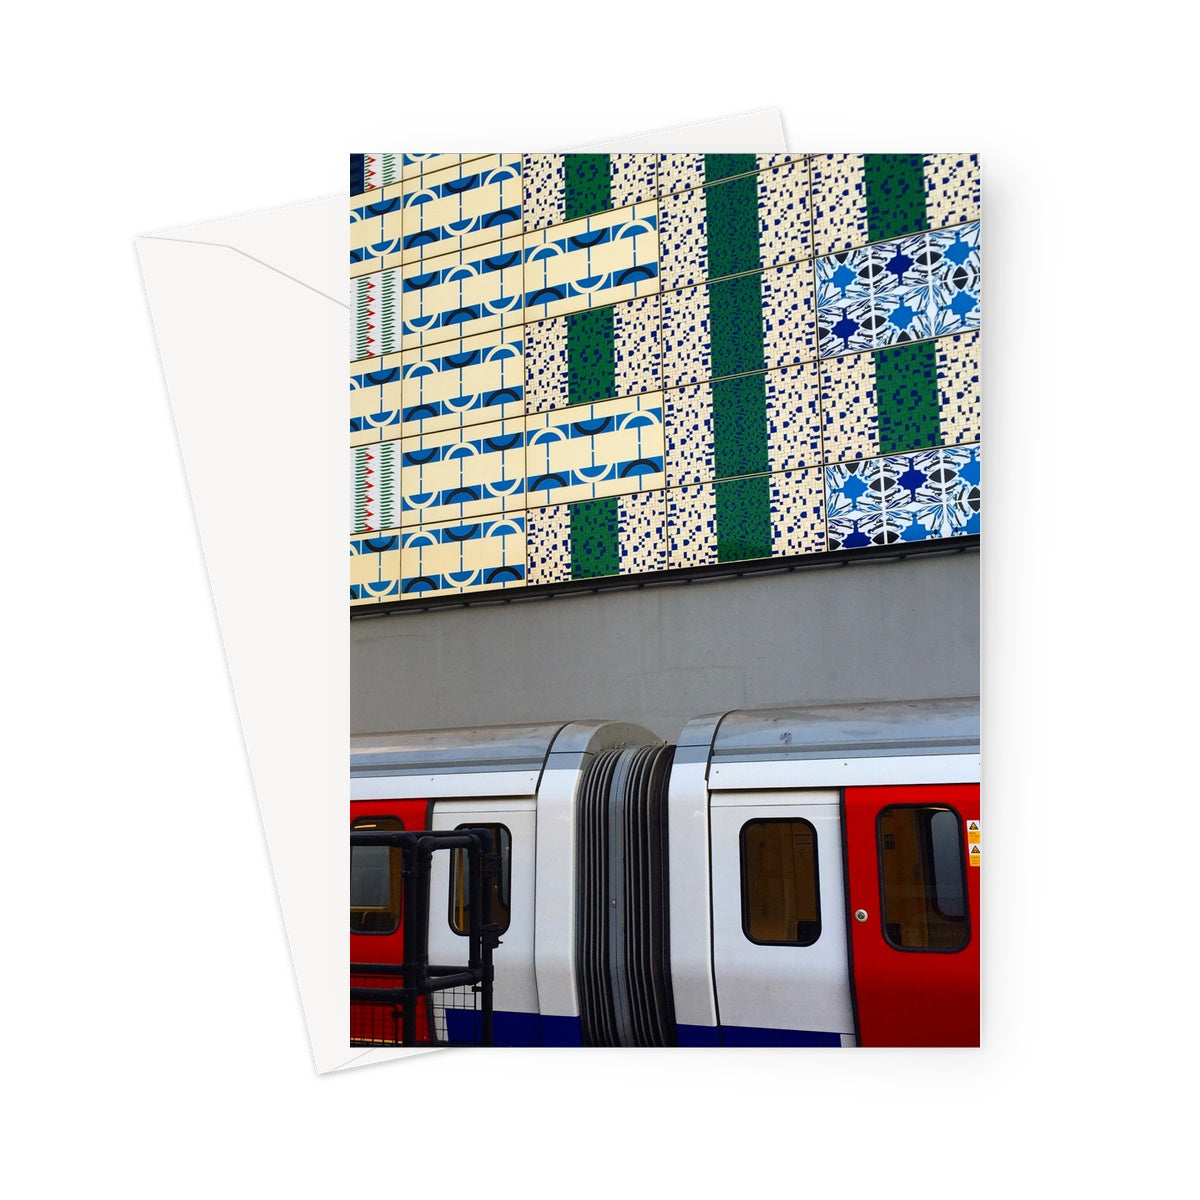 This greeting card shows a London Underground train parked beneath the partial view of a contemporary art work at Edgware Road station.